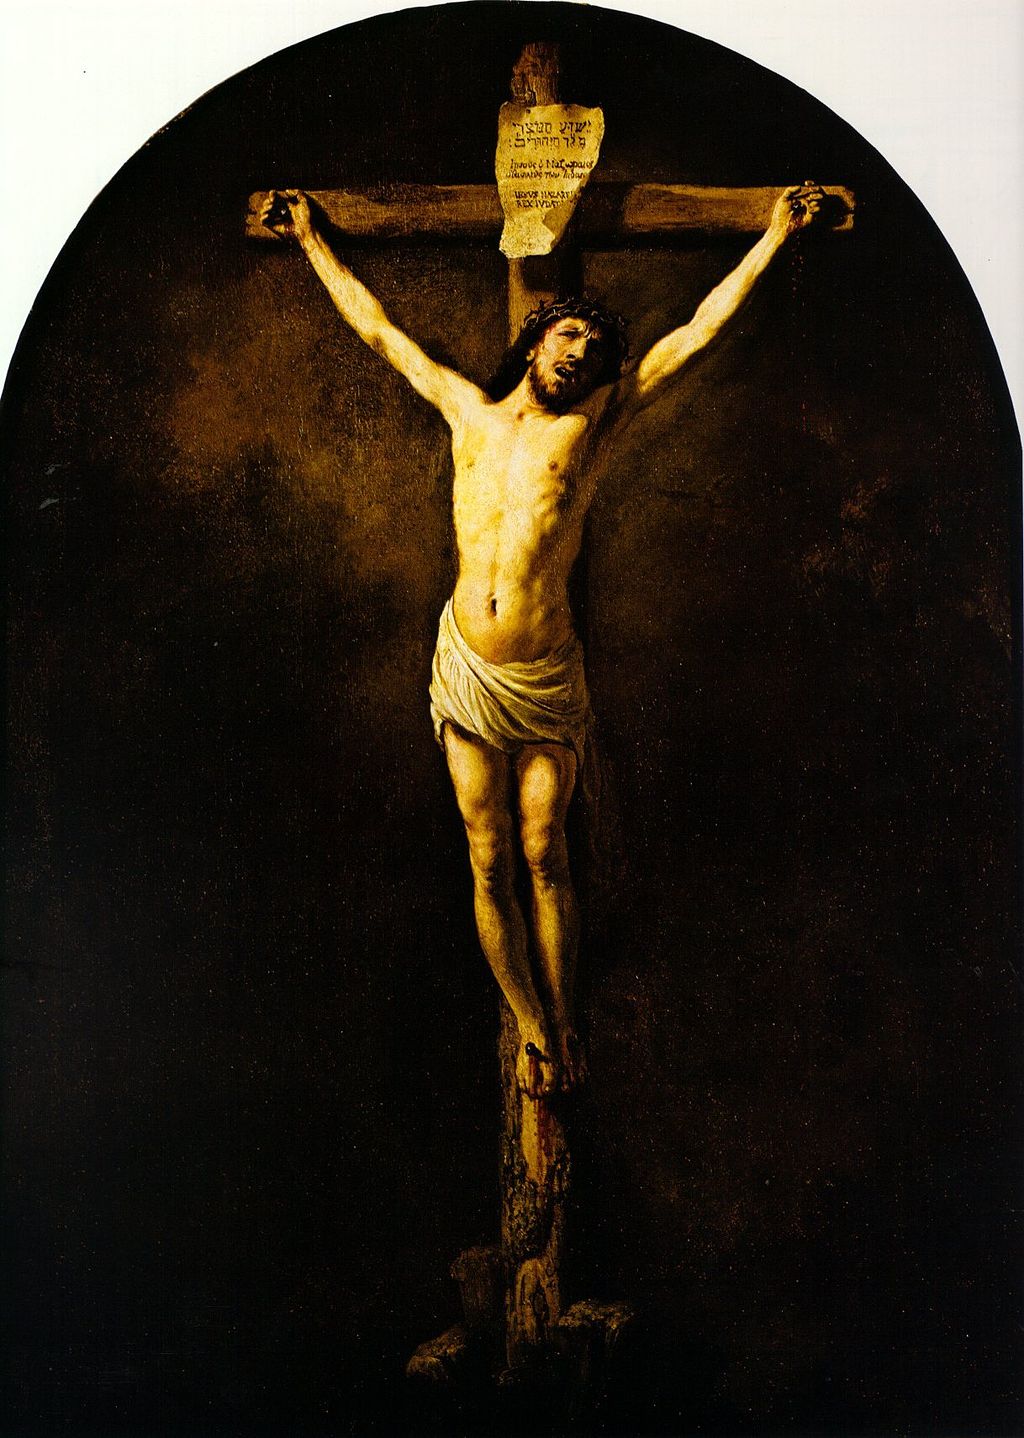 Christ on the Cross (Rembrandt) Painting by Rembrandt Oil on Canvas Reproduction by Blue Surf Art